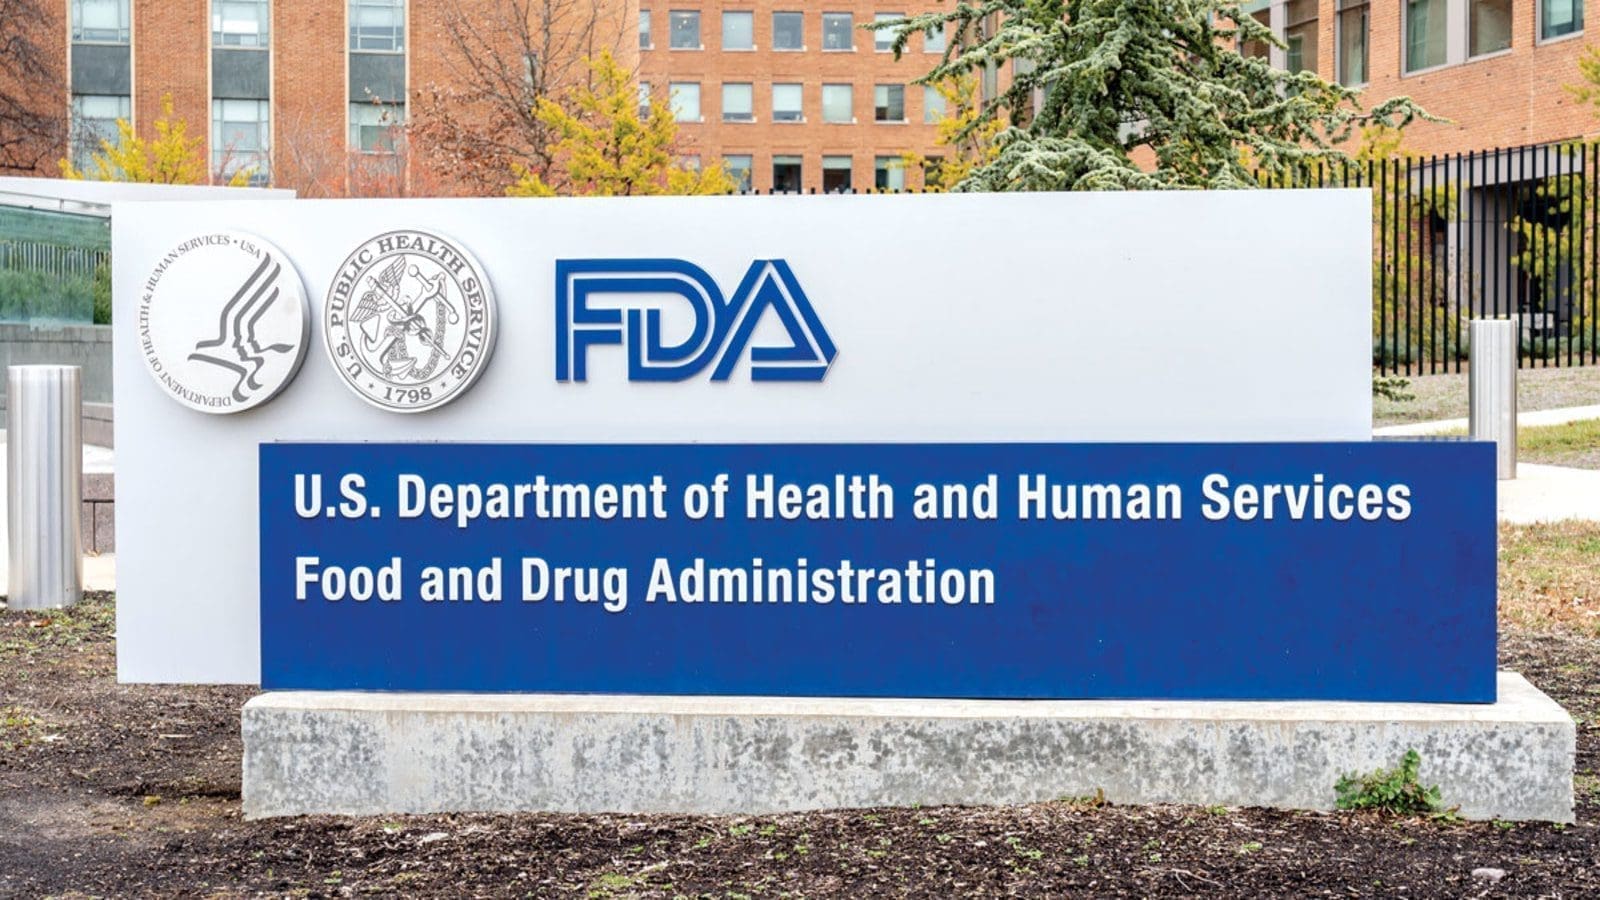 FDA issues guidance on intent not to enforce certain Food Safety Modernization Act regulations